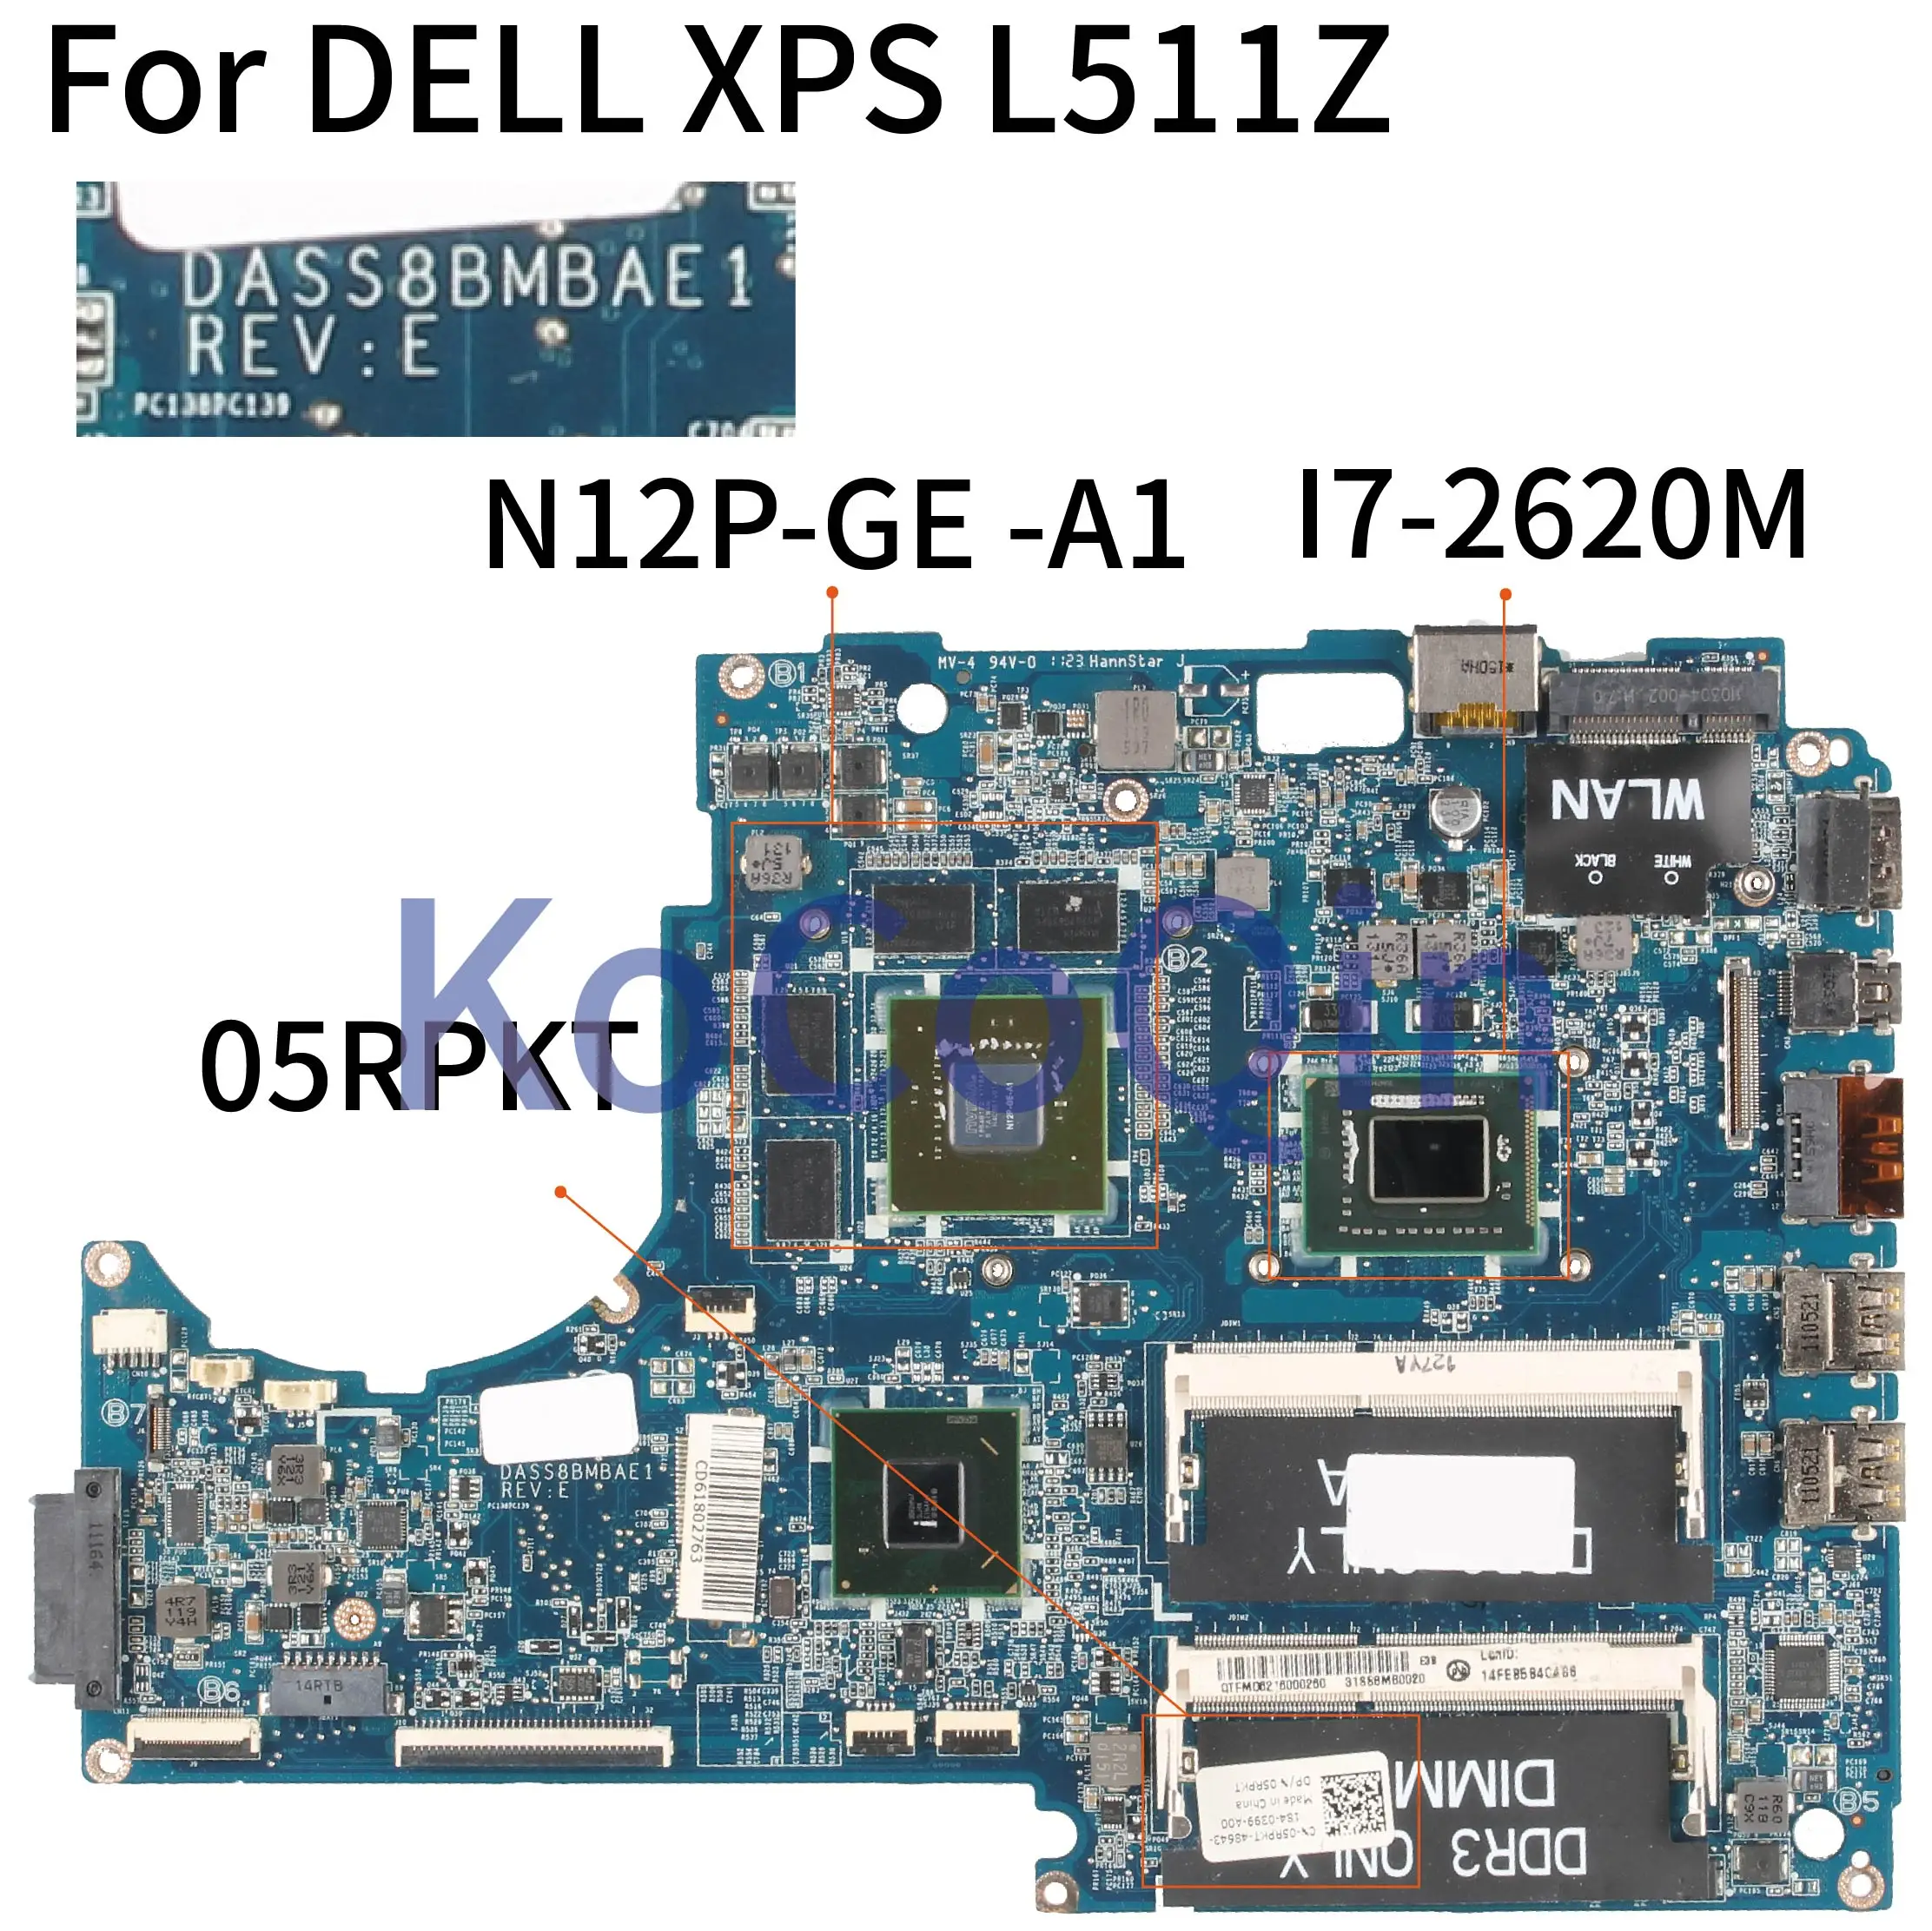 KoCoQin     DELL XPS 15 L511Z I7-2620M   CN-05RPKT 05RPKT DASS8BMBAE0